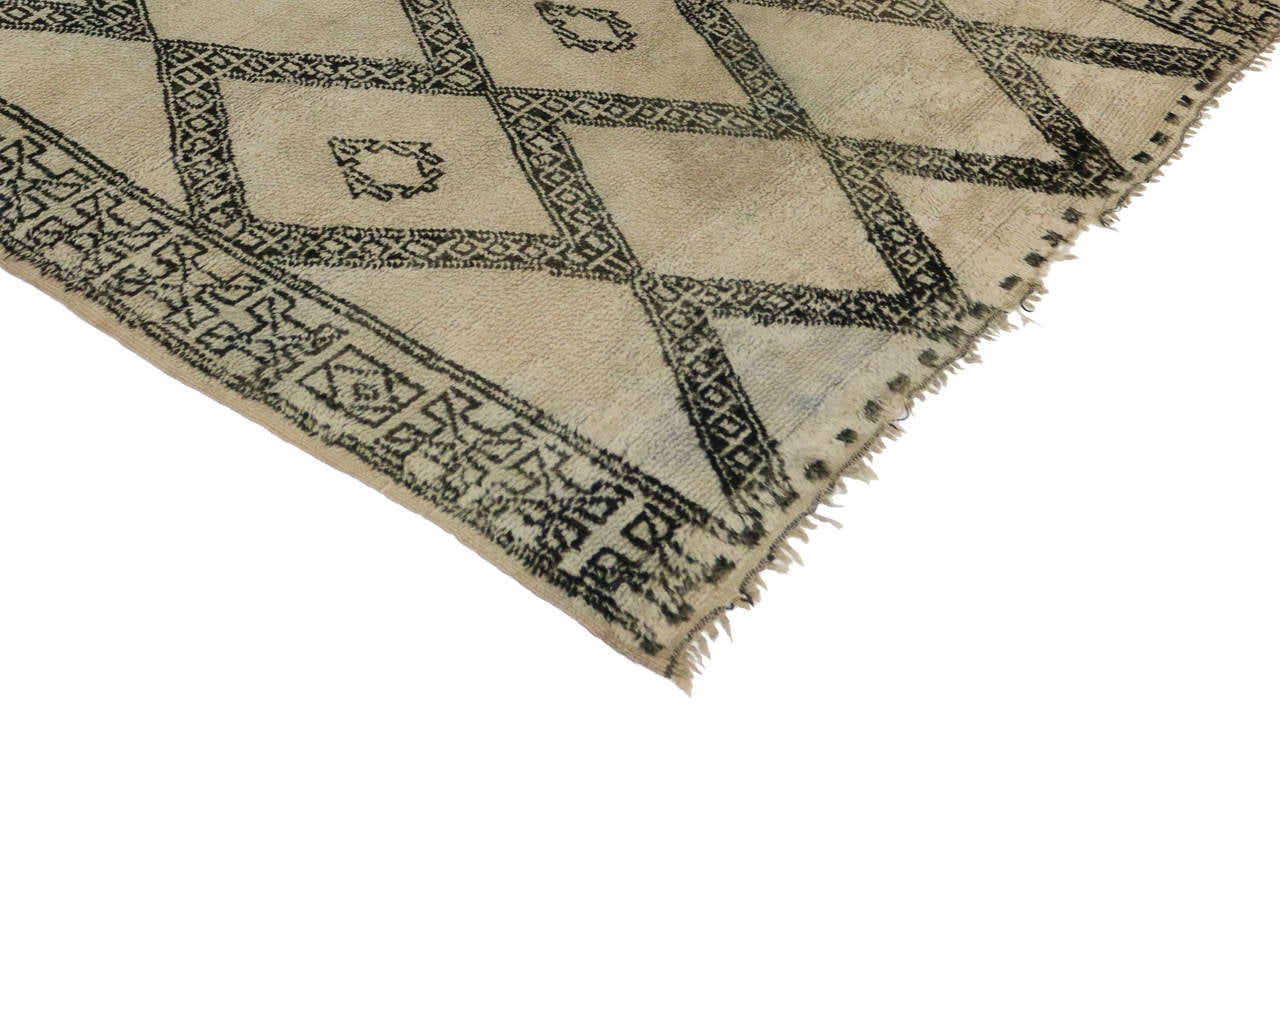 This Moroccan carpet harmonizes disparate elements and will add much needed texture to Modern décor and minimalist interiors. With its well defined lines and symmetrical pattern, Berber Moroccan rugs like this are prized for their understated and